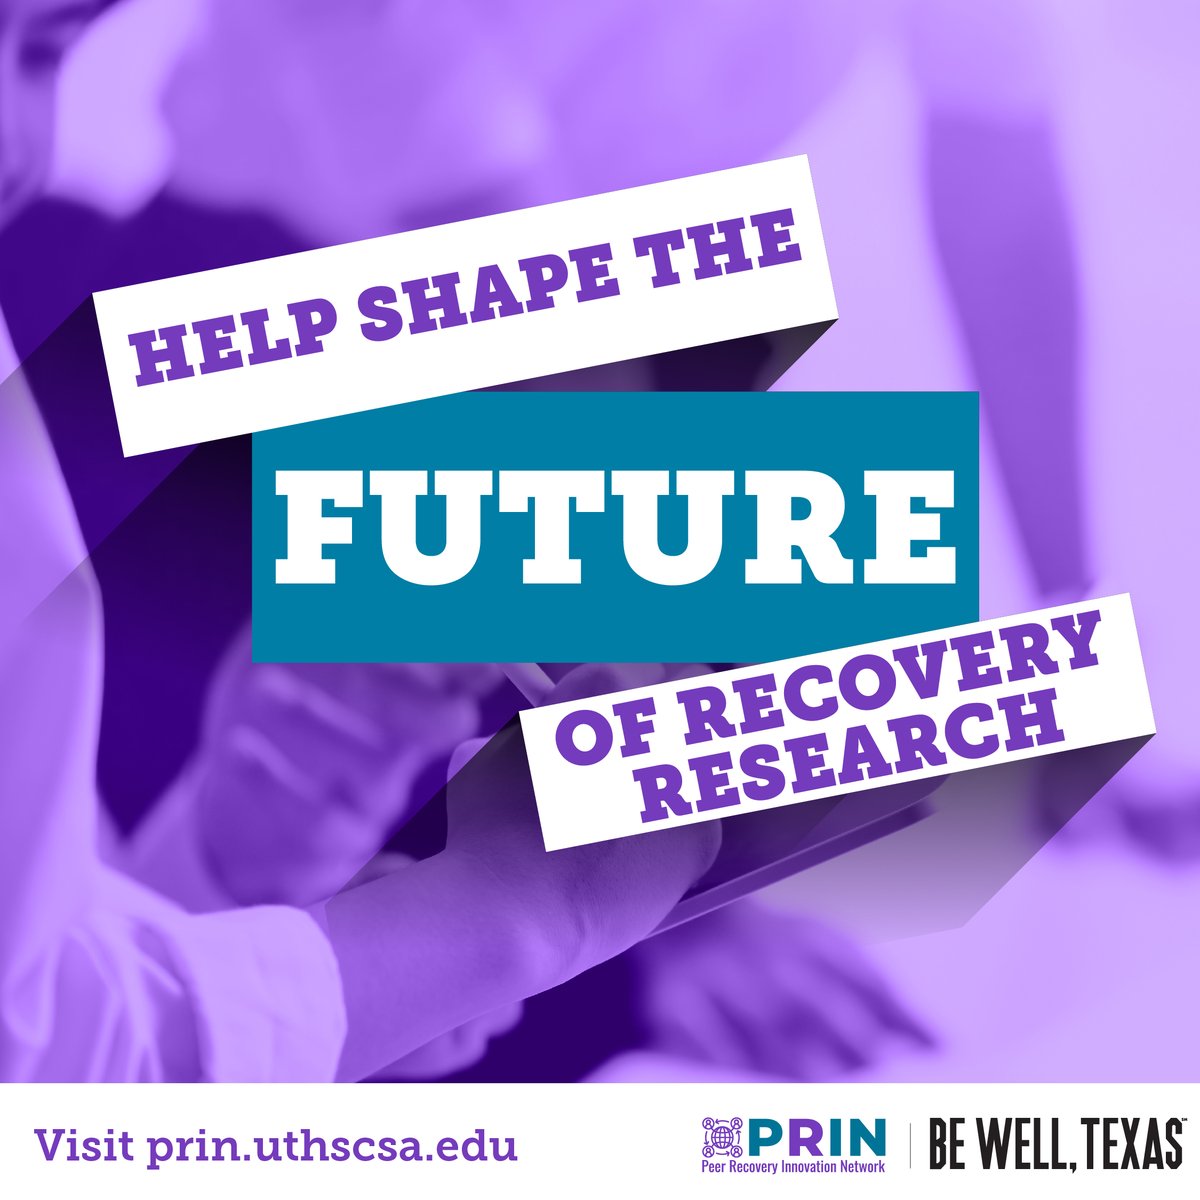 We need YOUR input on recovery research! 📢 The Peer Recovery Innovation Network is looking for individuals who work in #RecoverySupport to take a survey to help define the focus of #RecoveryResearch. To learn more, visit prin.uthscsa.edu #YourVoiceMatters